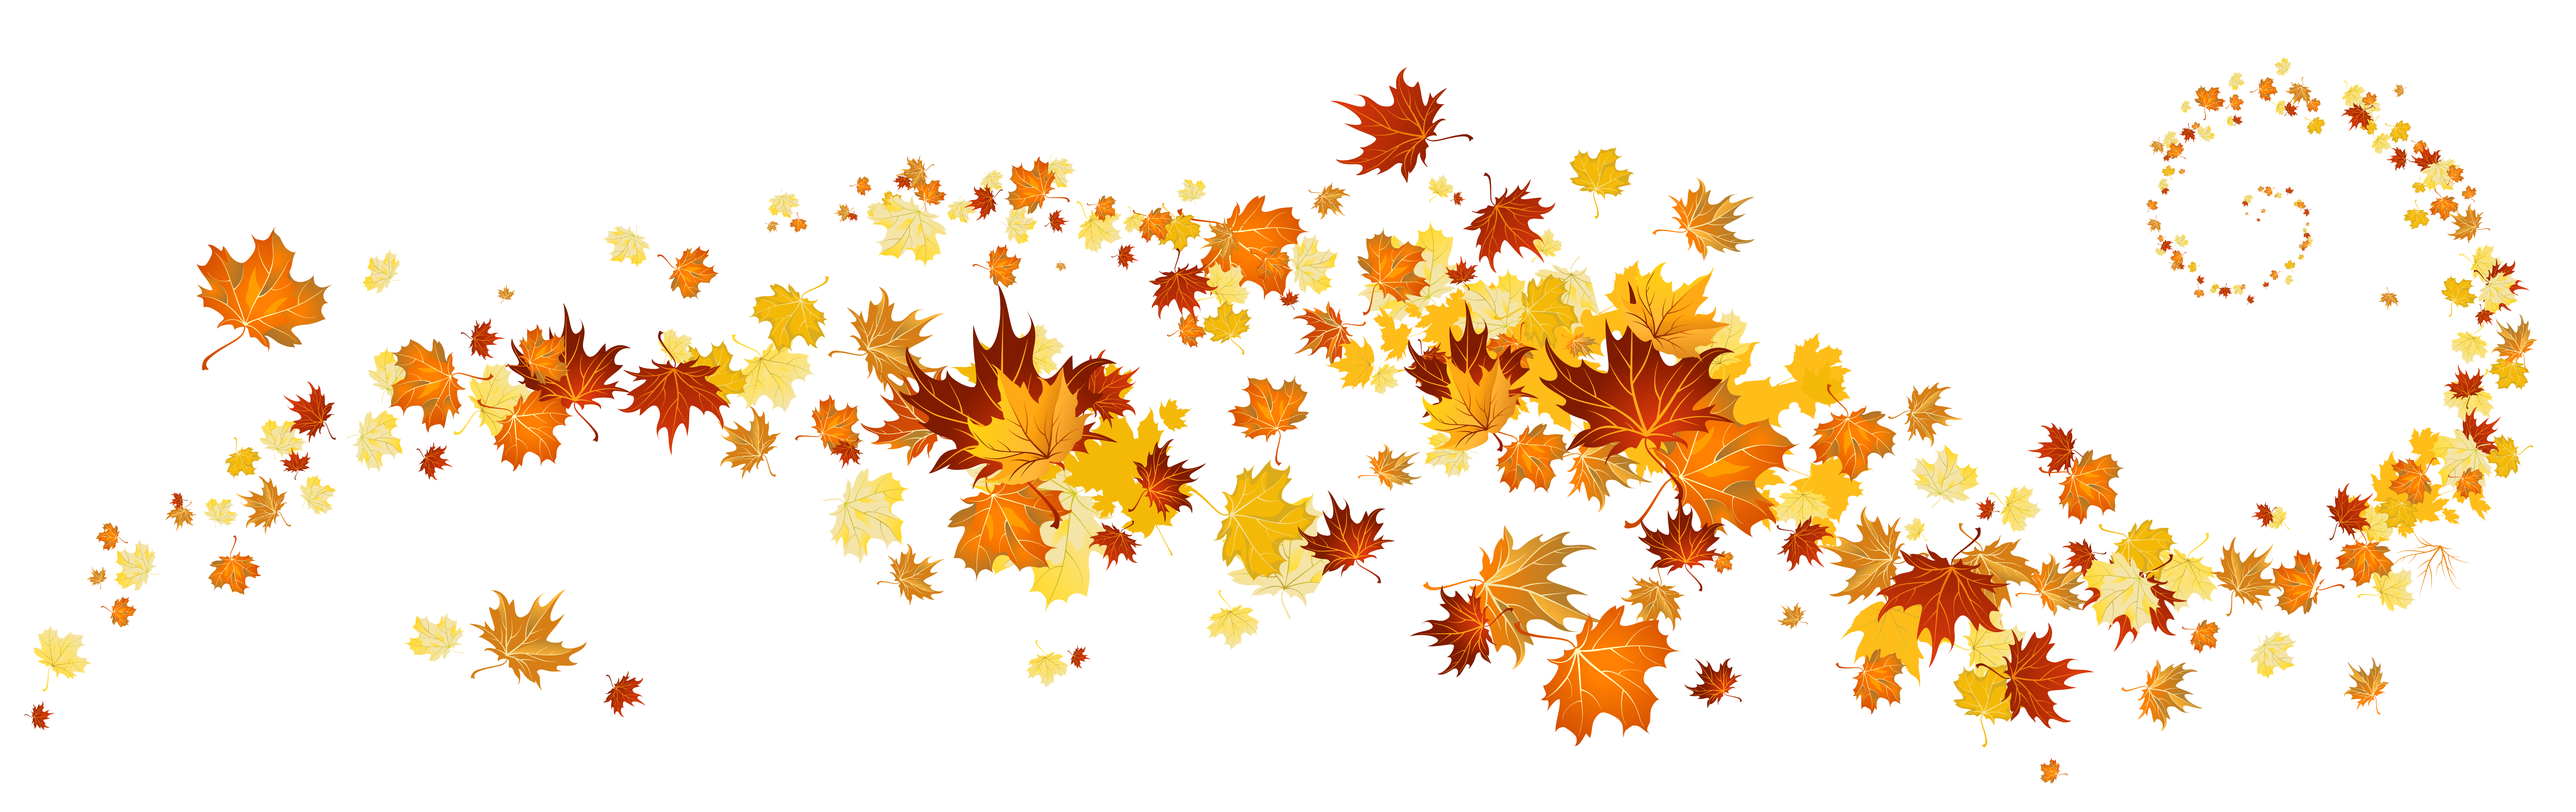 Fall Leaves Pictures Clip Art